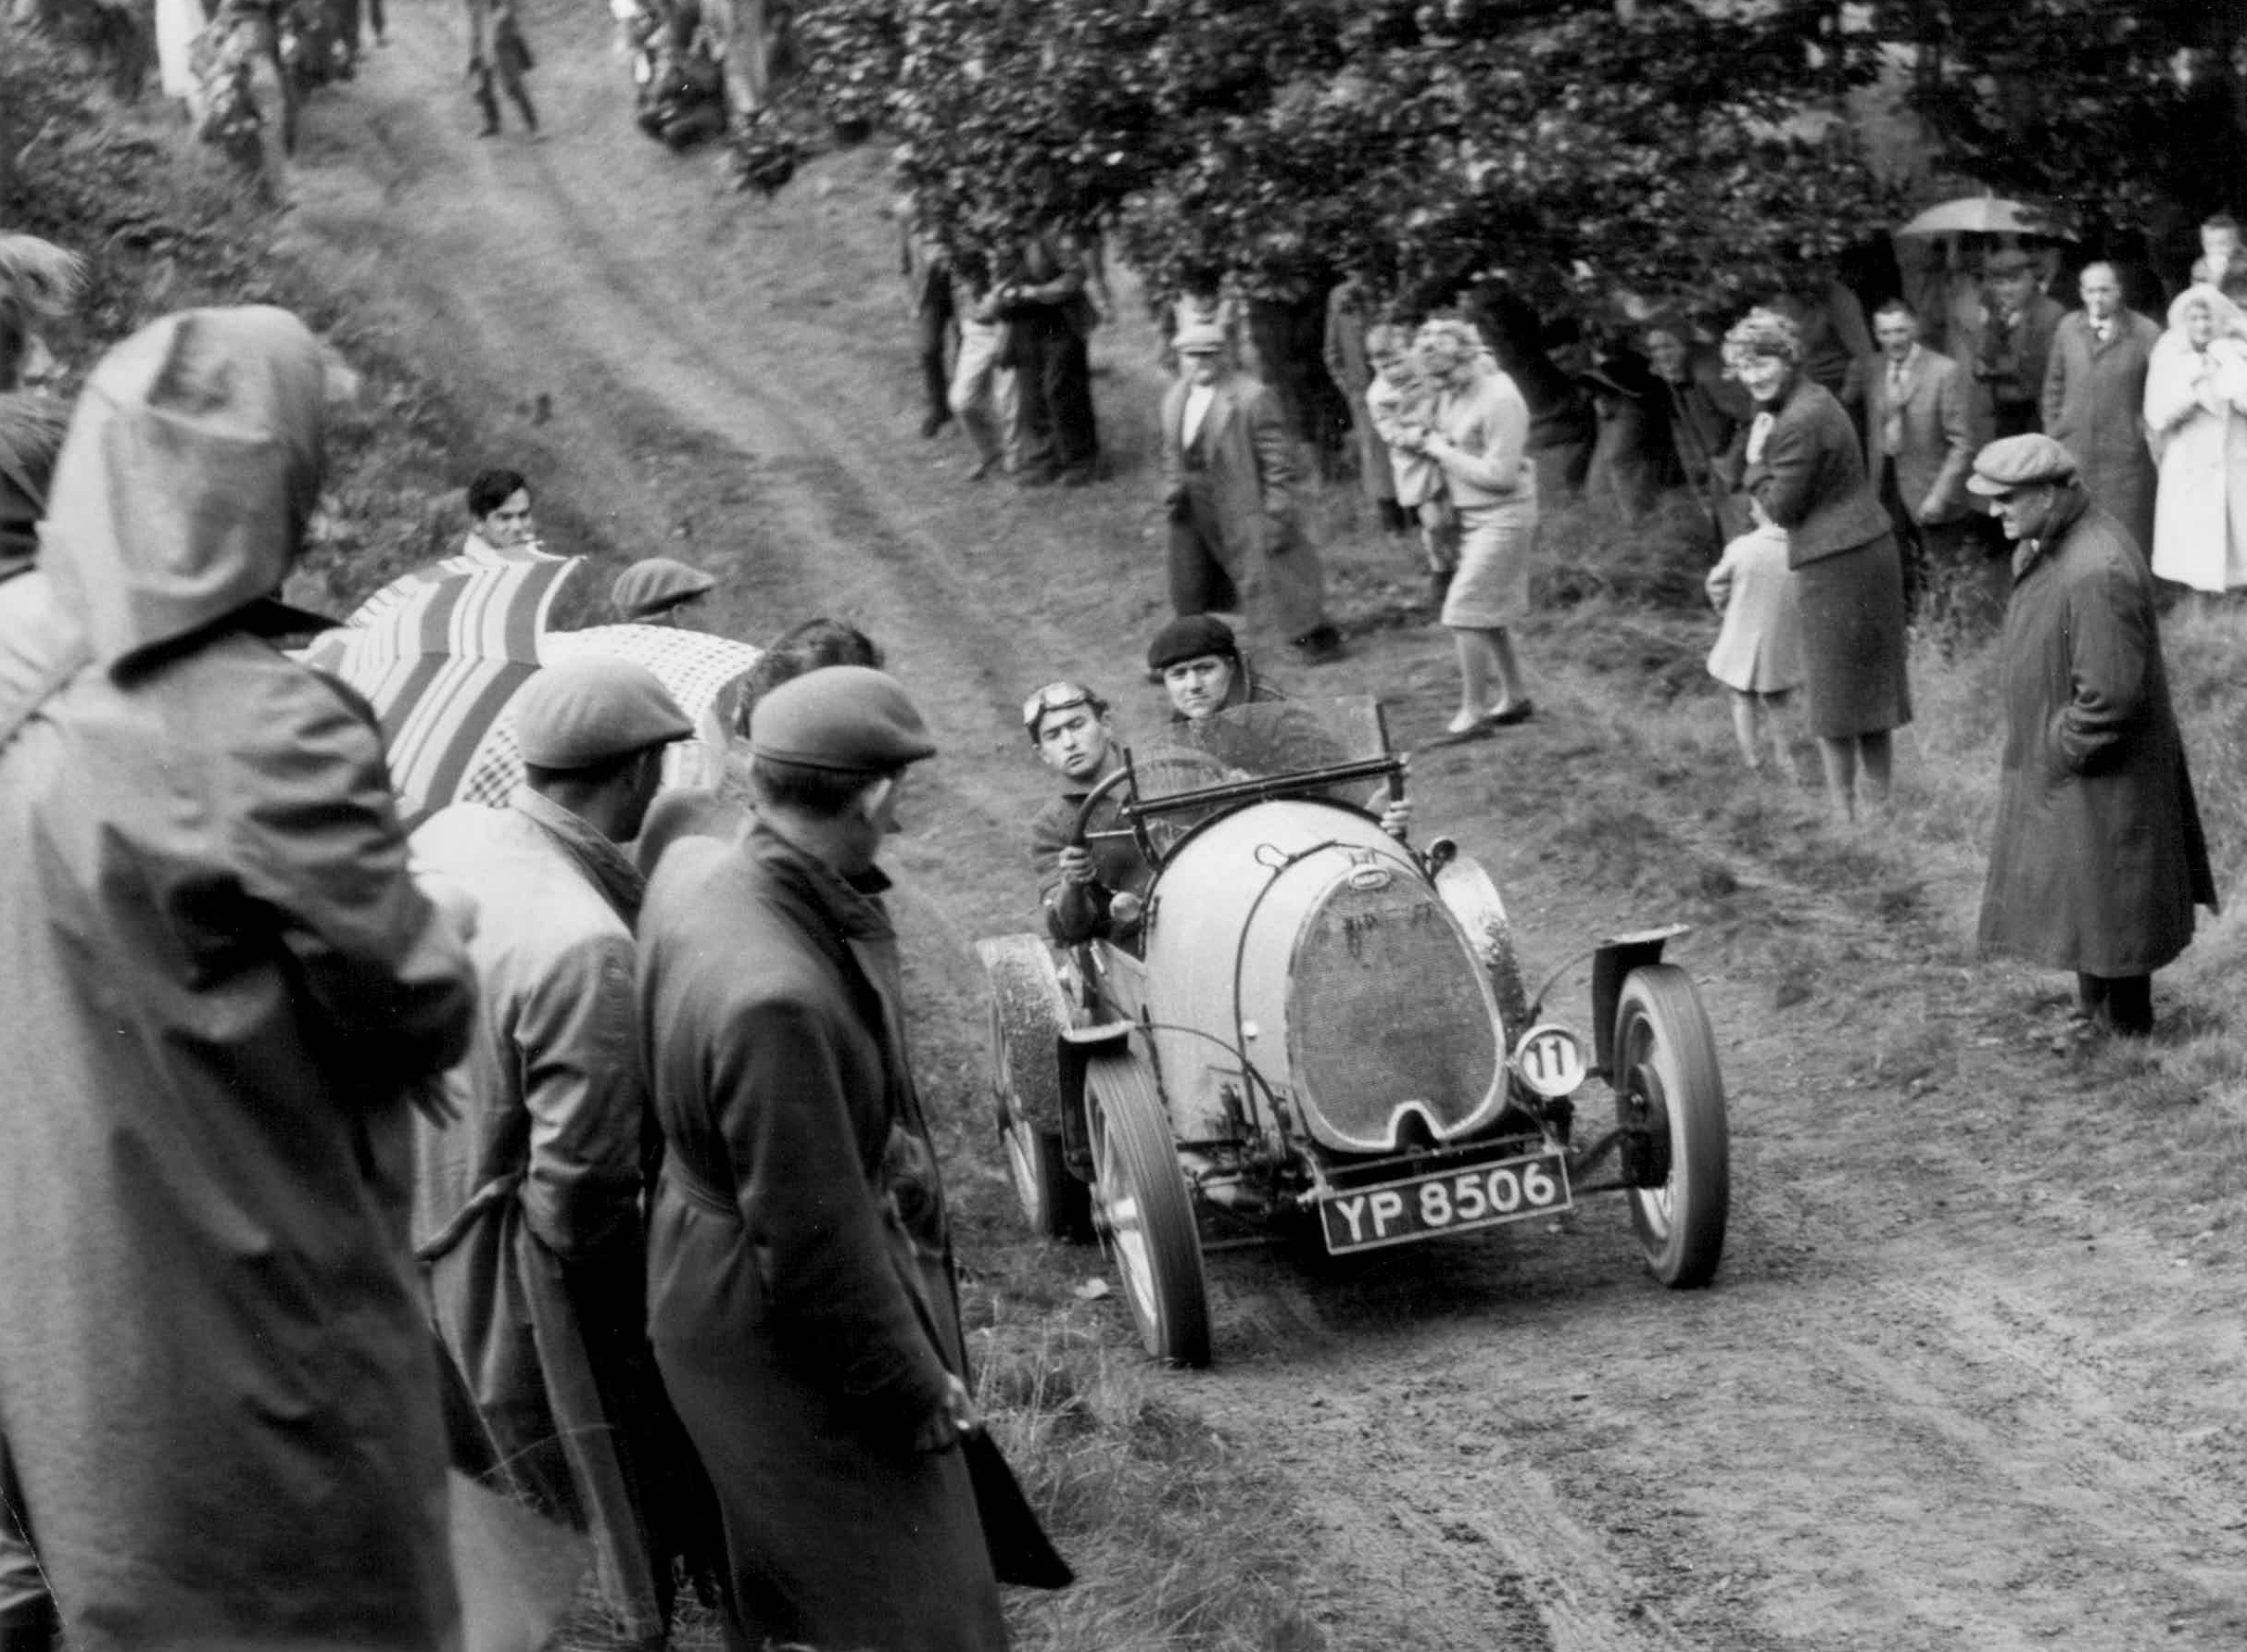 VSCC Trials Season returns with the historic Welsh Weekend cover